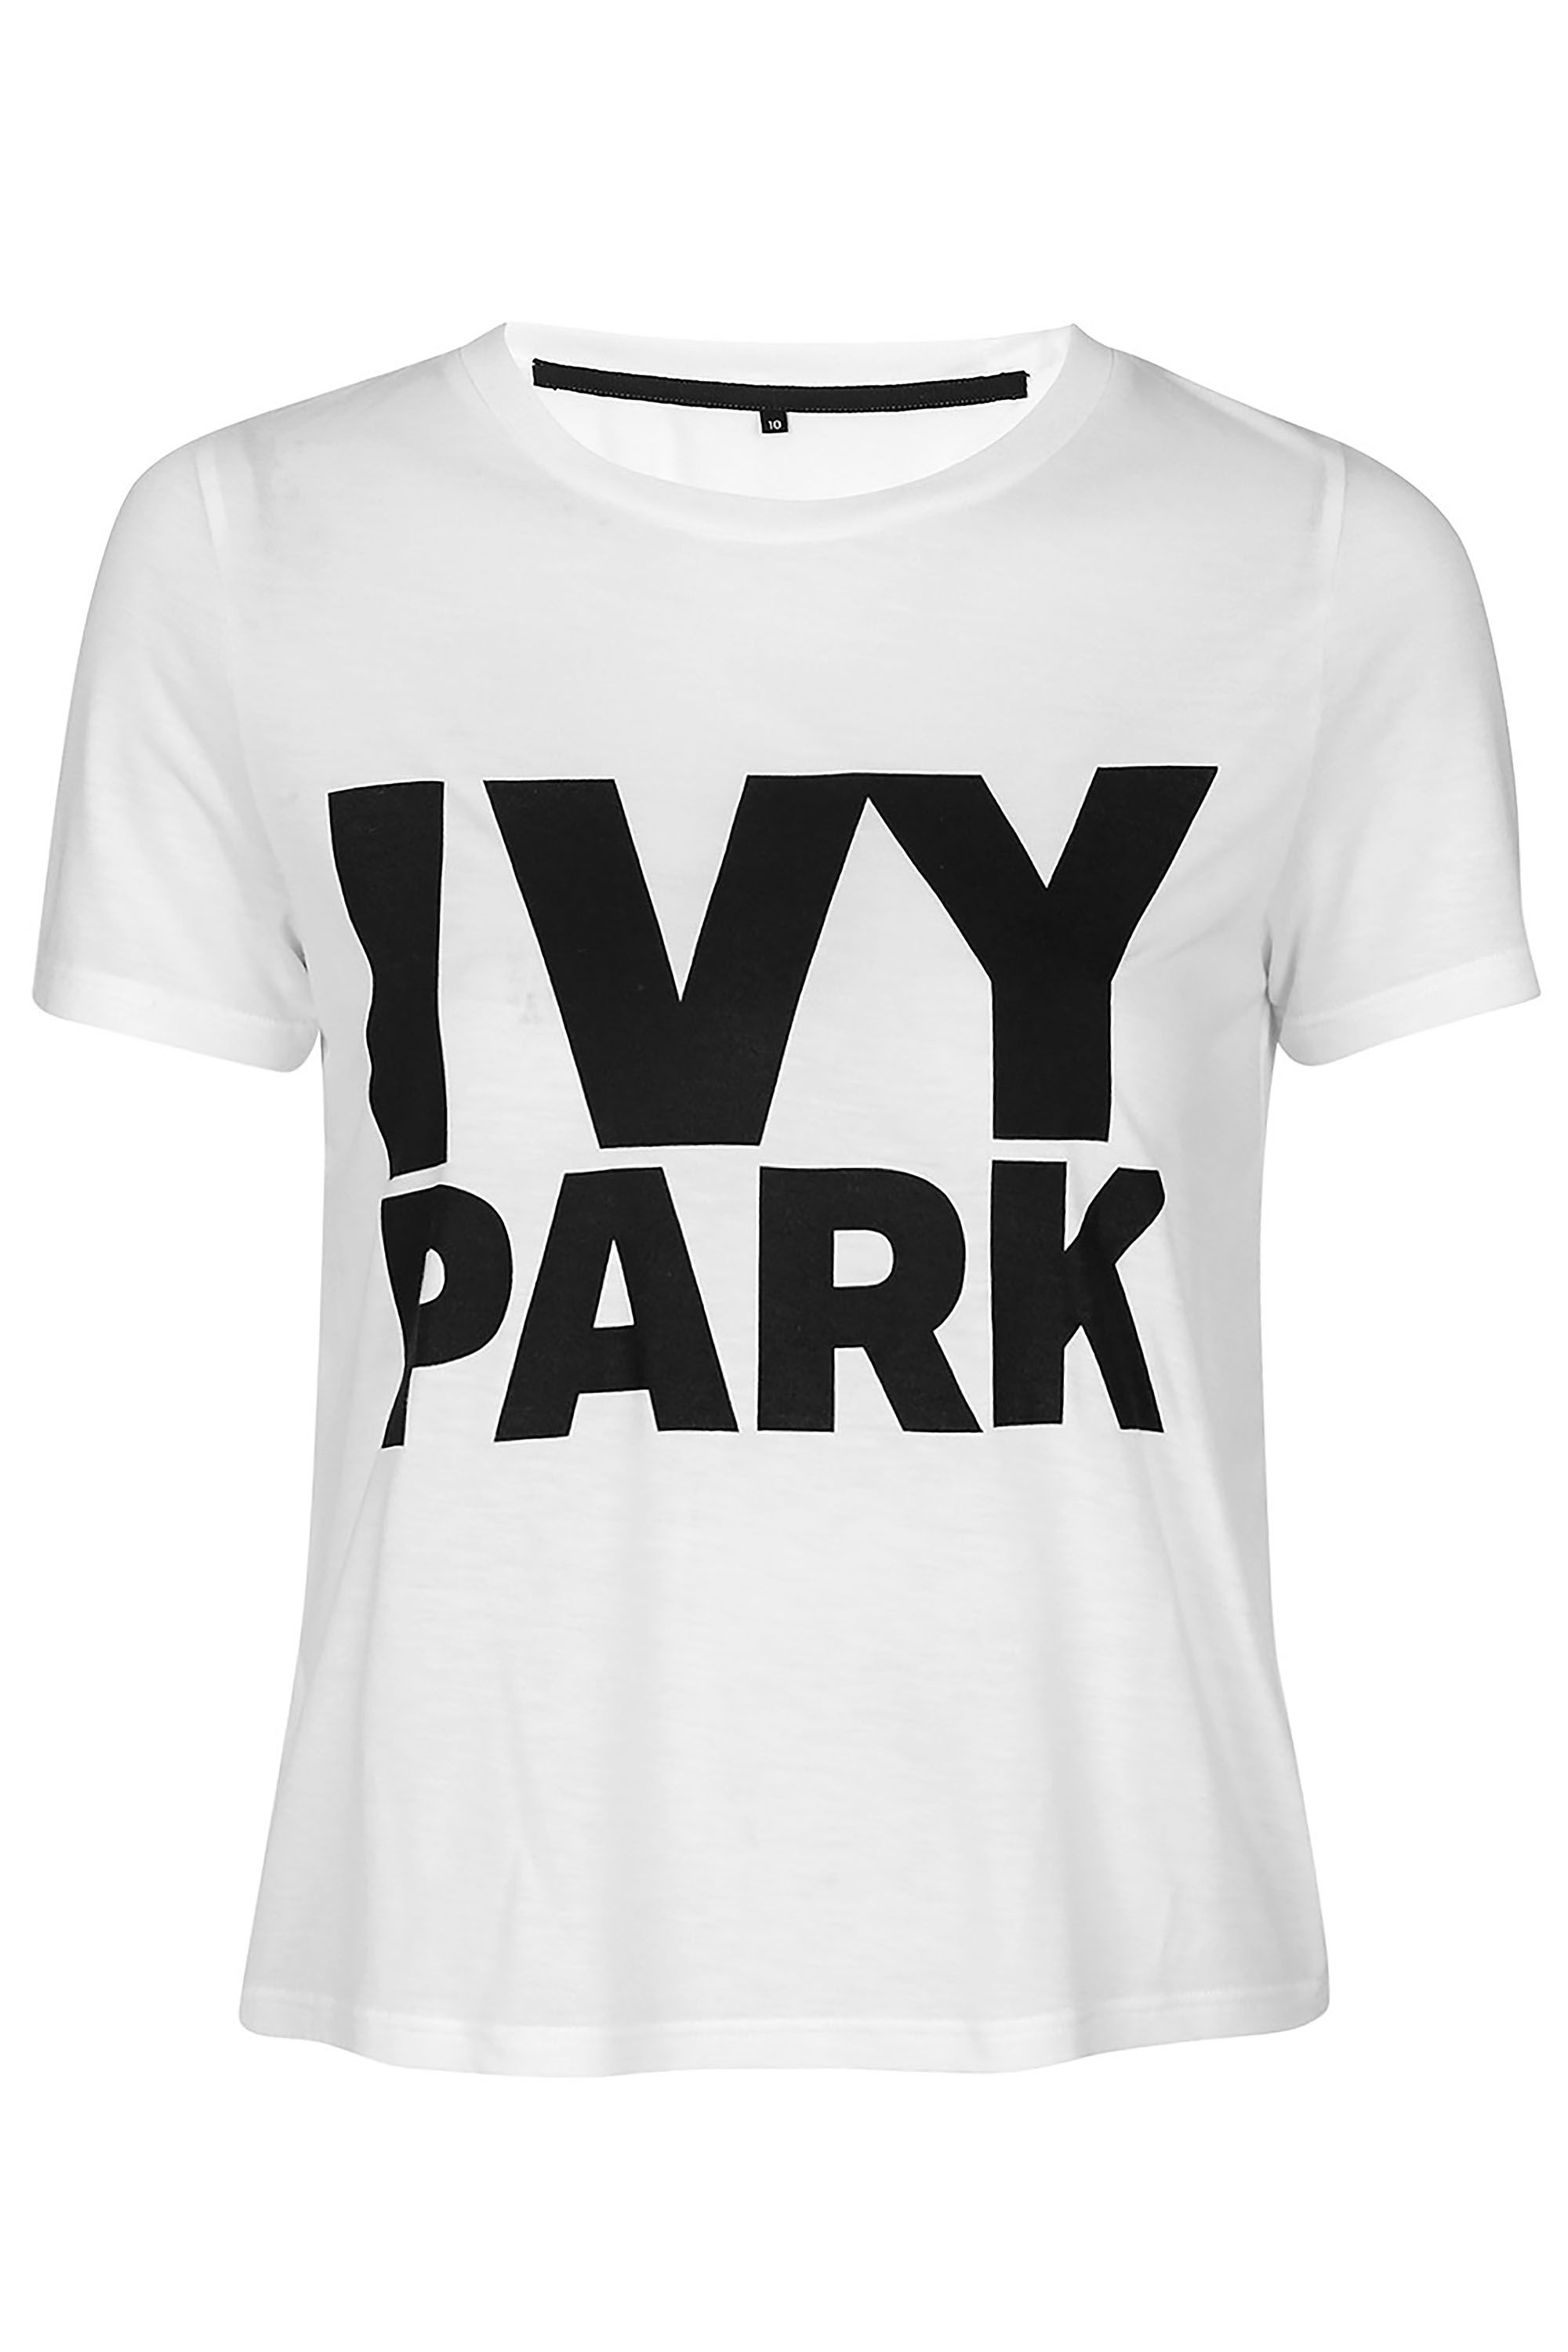 ivy park clothing for sale